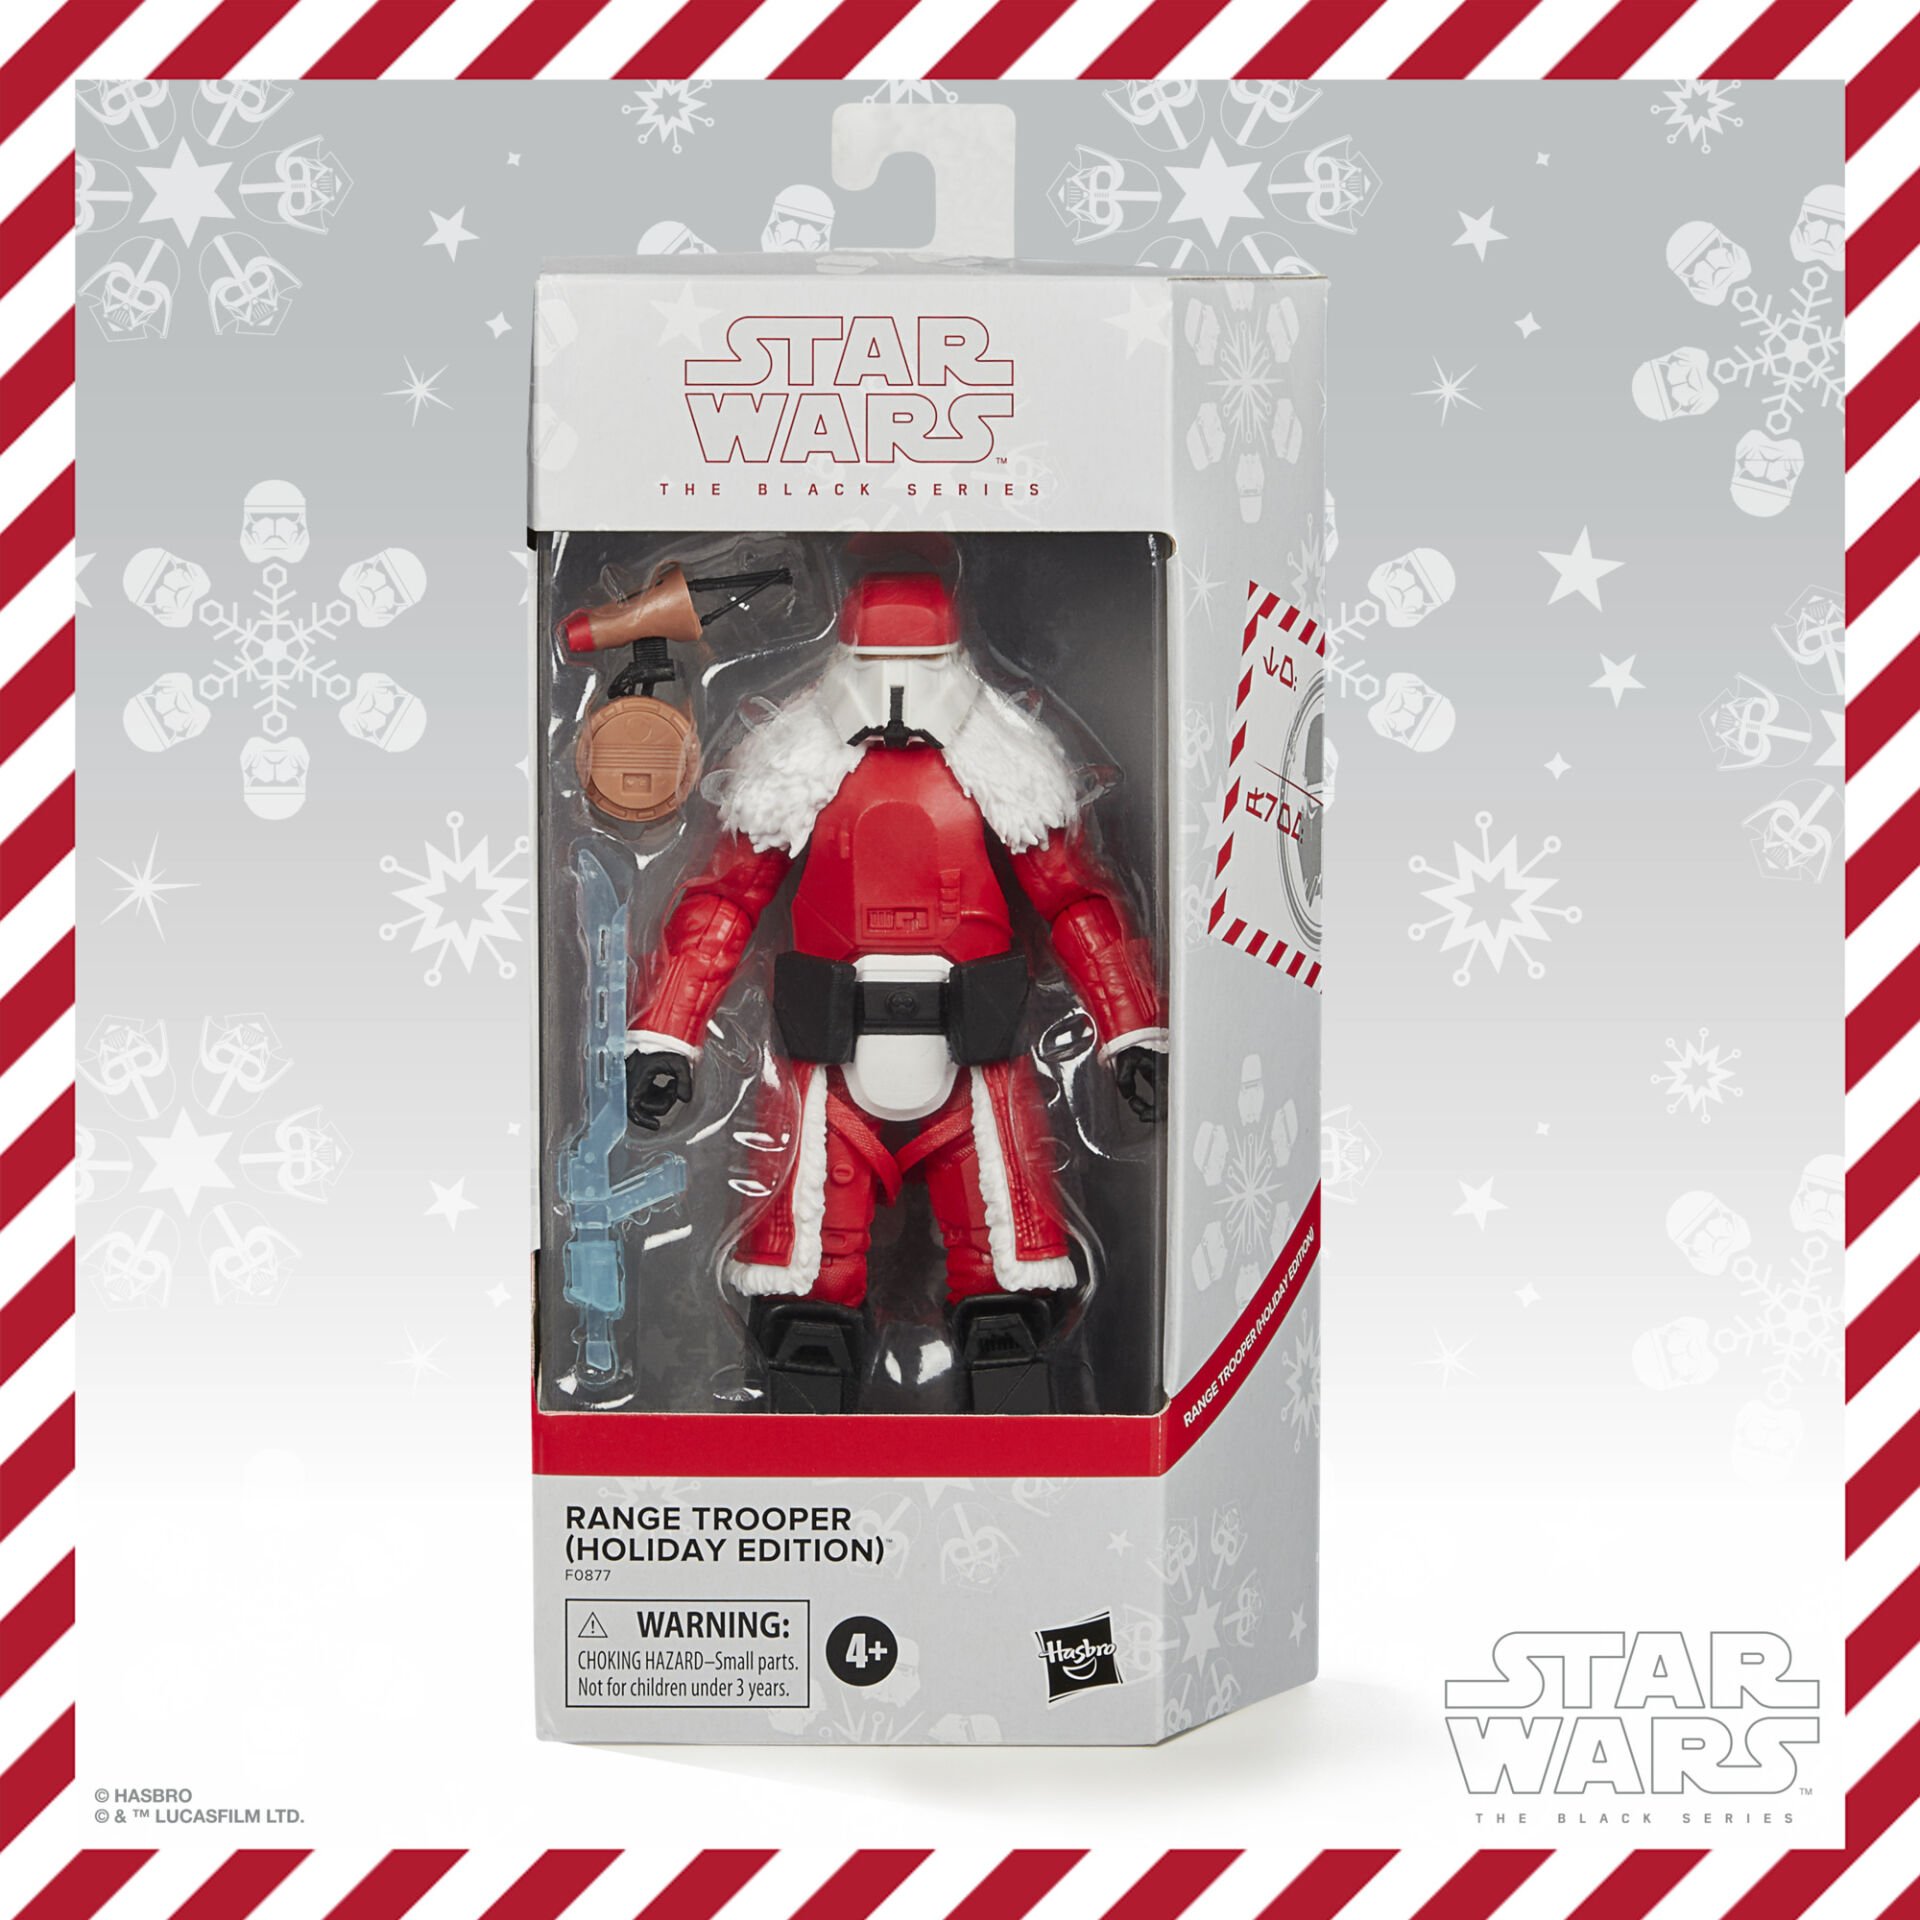 Star Wars The Black Series Range Trooper (Holiday Edition) Exclusive